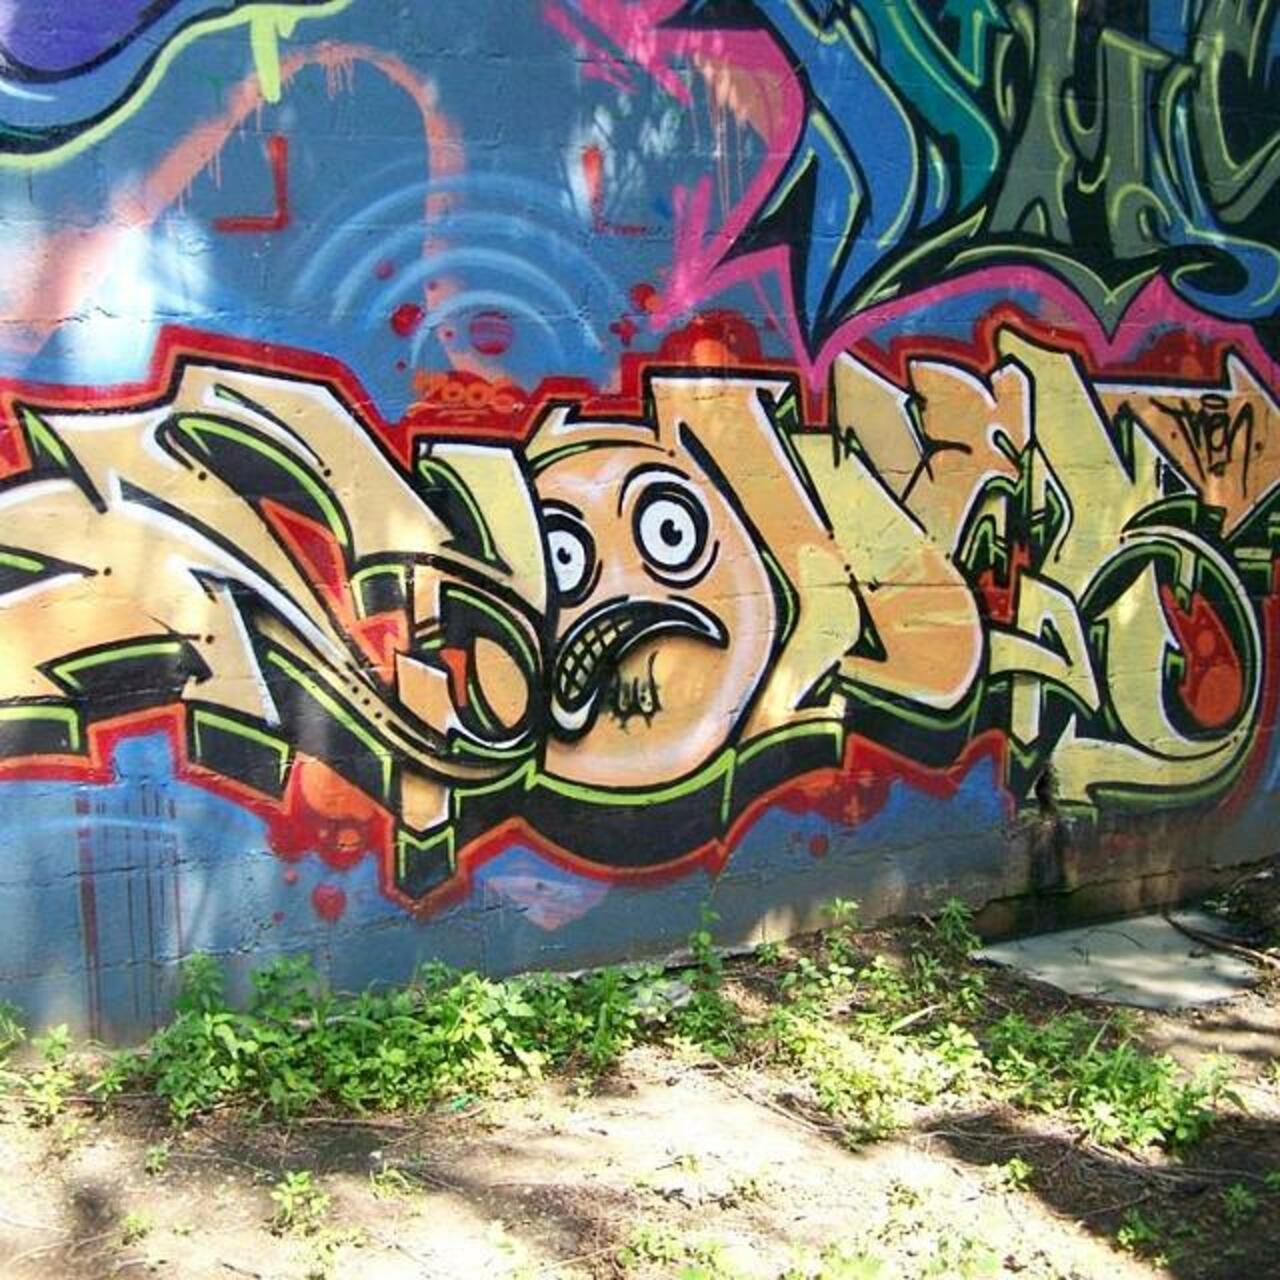 #hiphop That day THENSKI walked a mile in YODER's shoes...
#thenone #then #yodes #yoder #graffiti #mural #art #hist… http://t.co/E3Jr8dPXqD